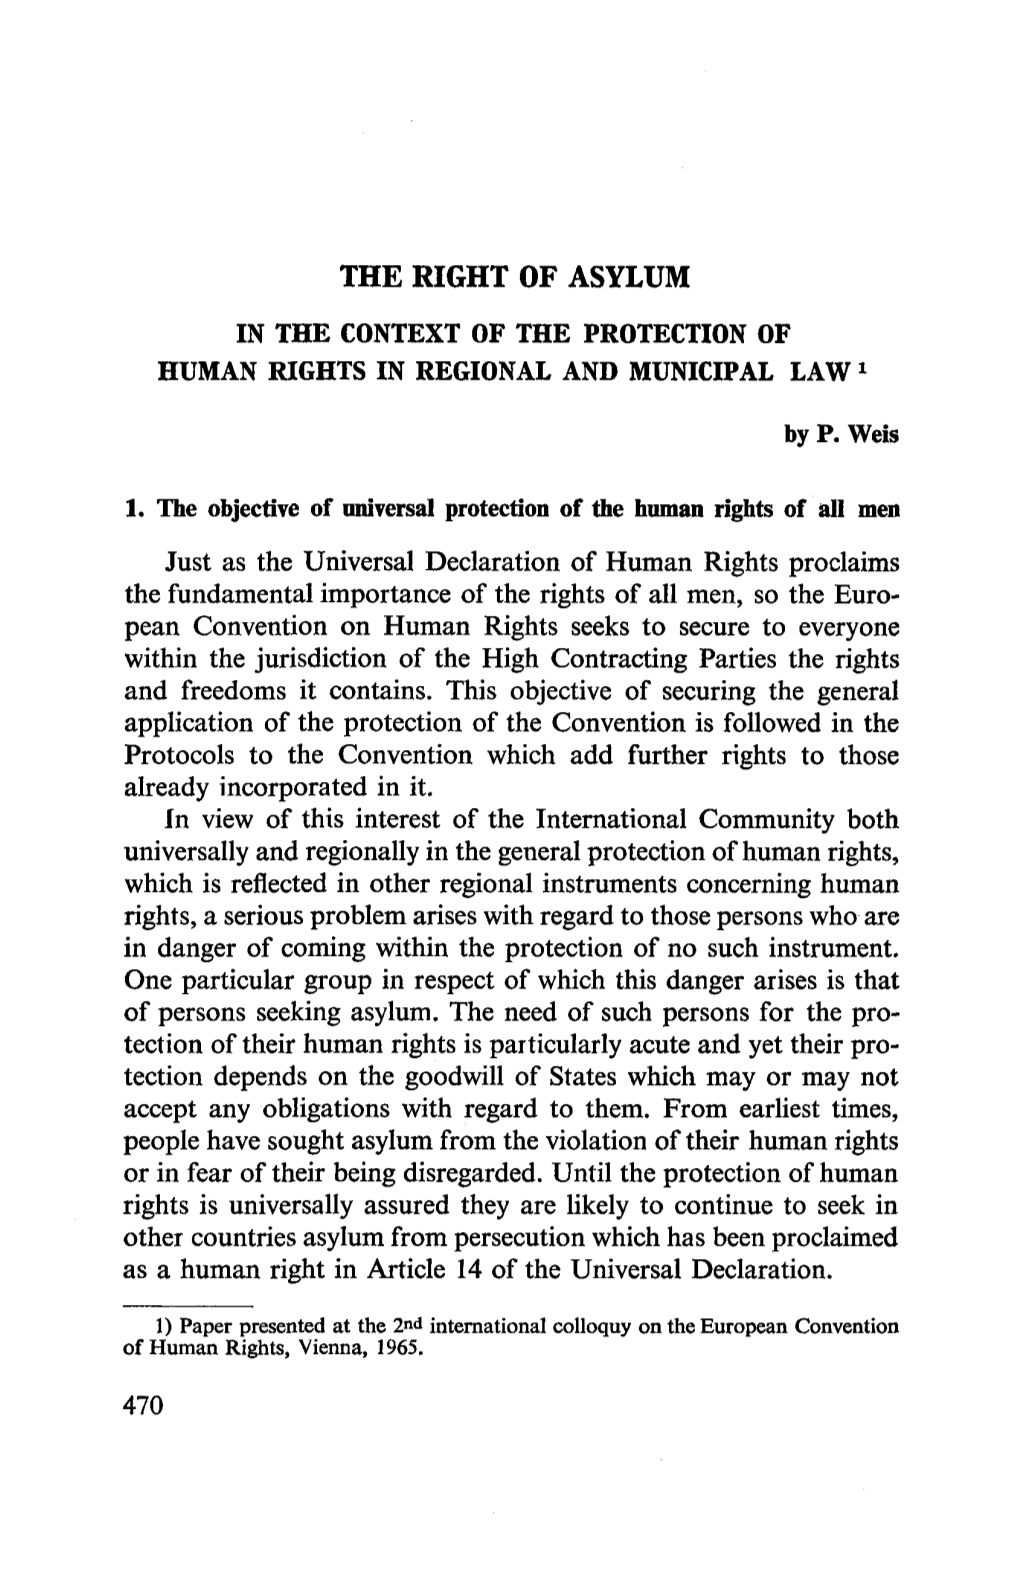 The Right of Asylum in the Context of the Protection of Human Rights In